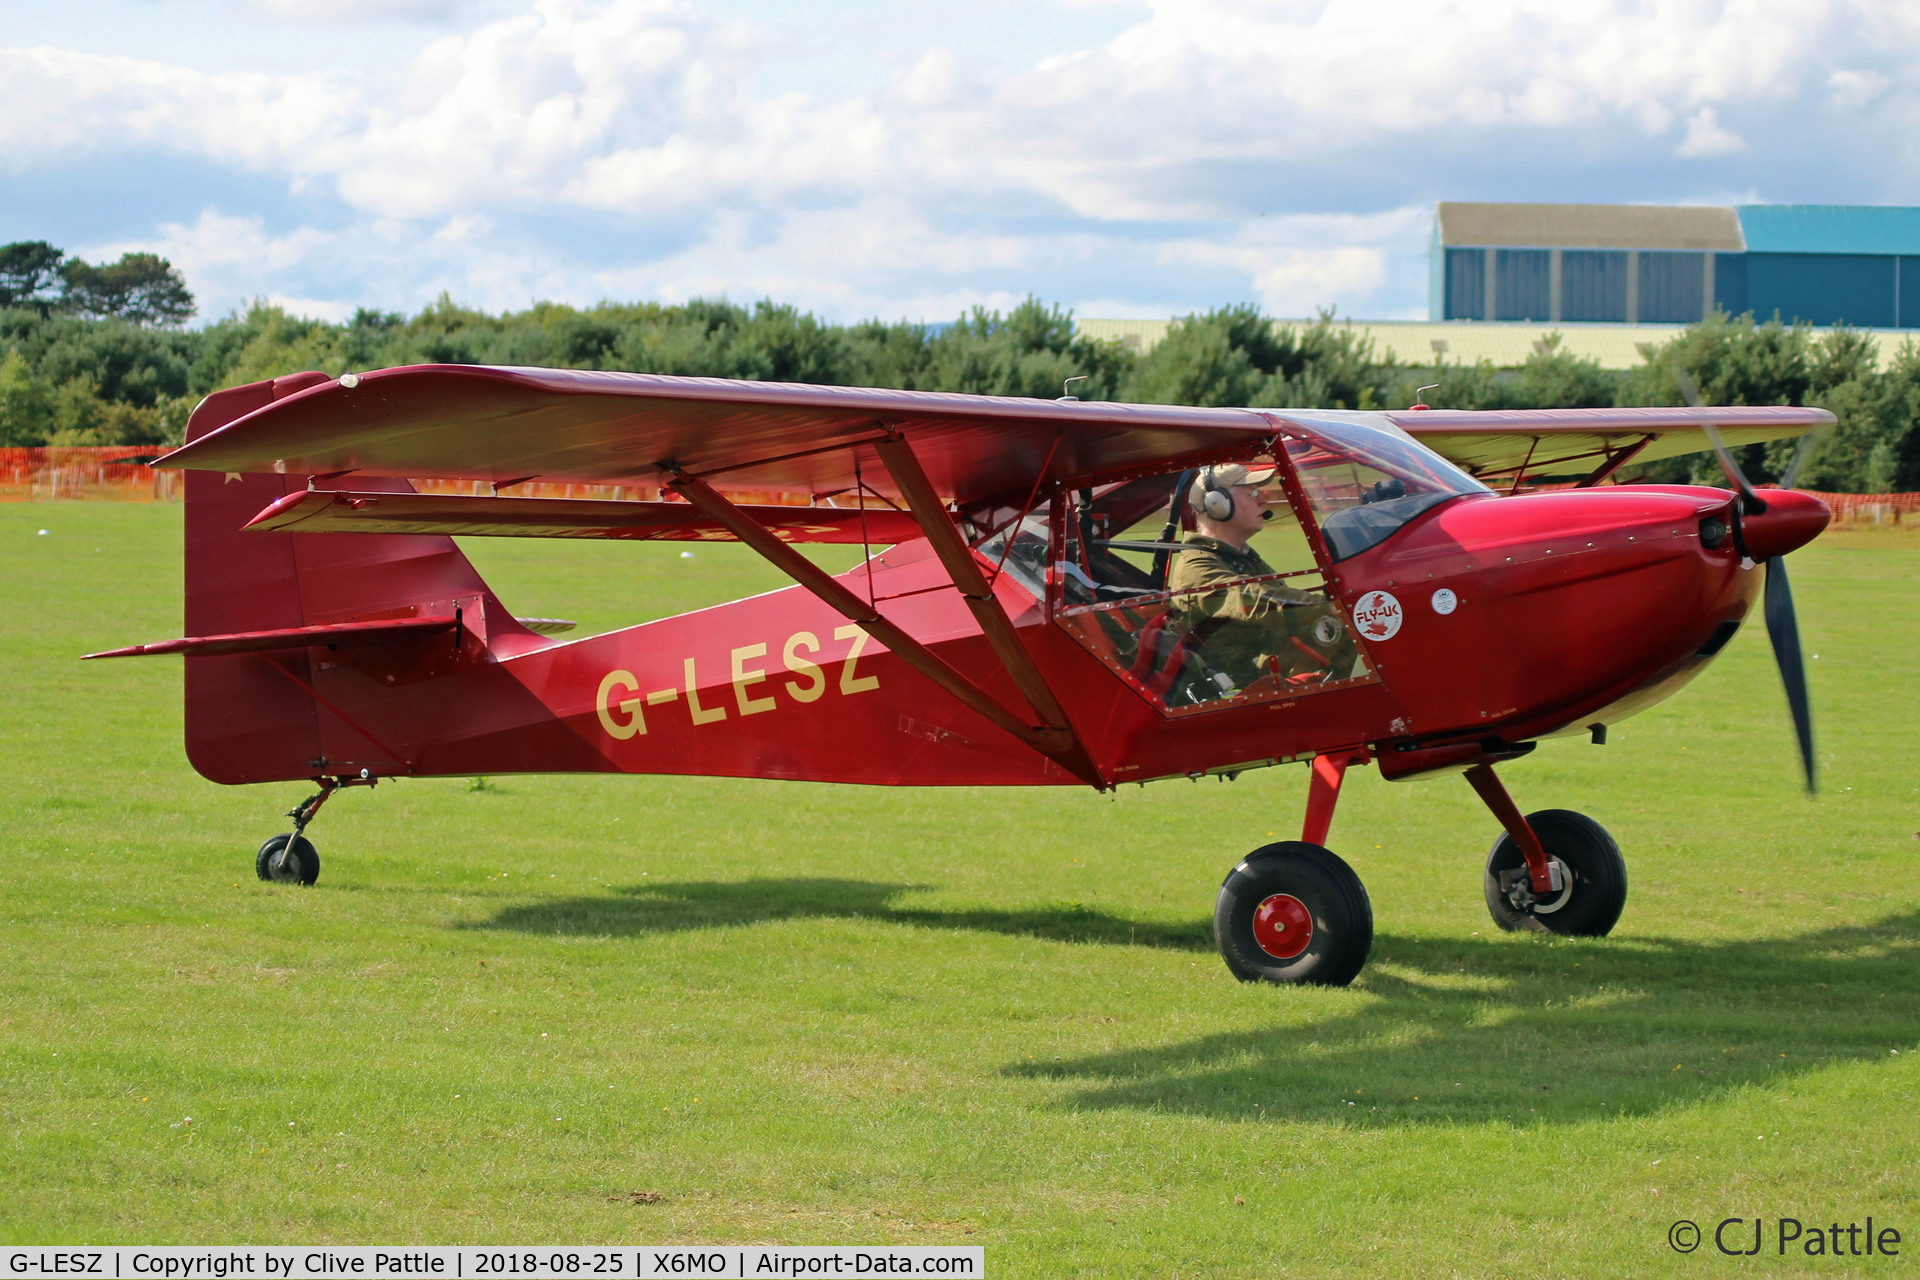 G-LESZ, 2003 Skystar Kitfox Series 5 C/N PFA 172C-12822, Present at the Montrose Air Station Heritage Centre light aircraft fly-in held on 25th August 2018.